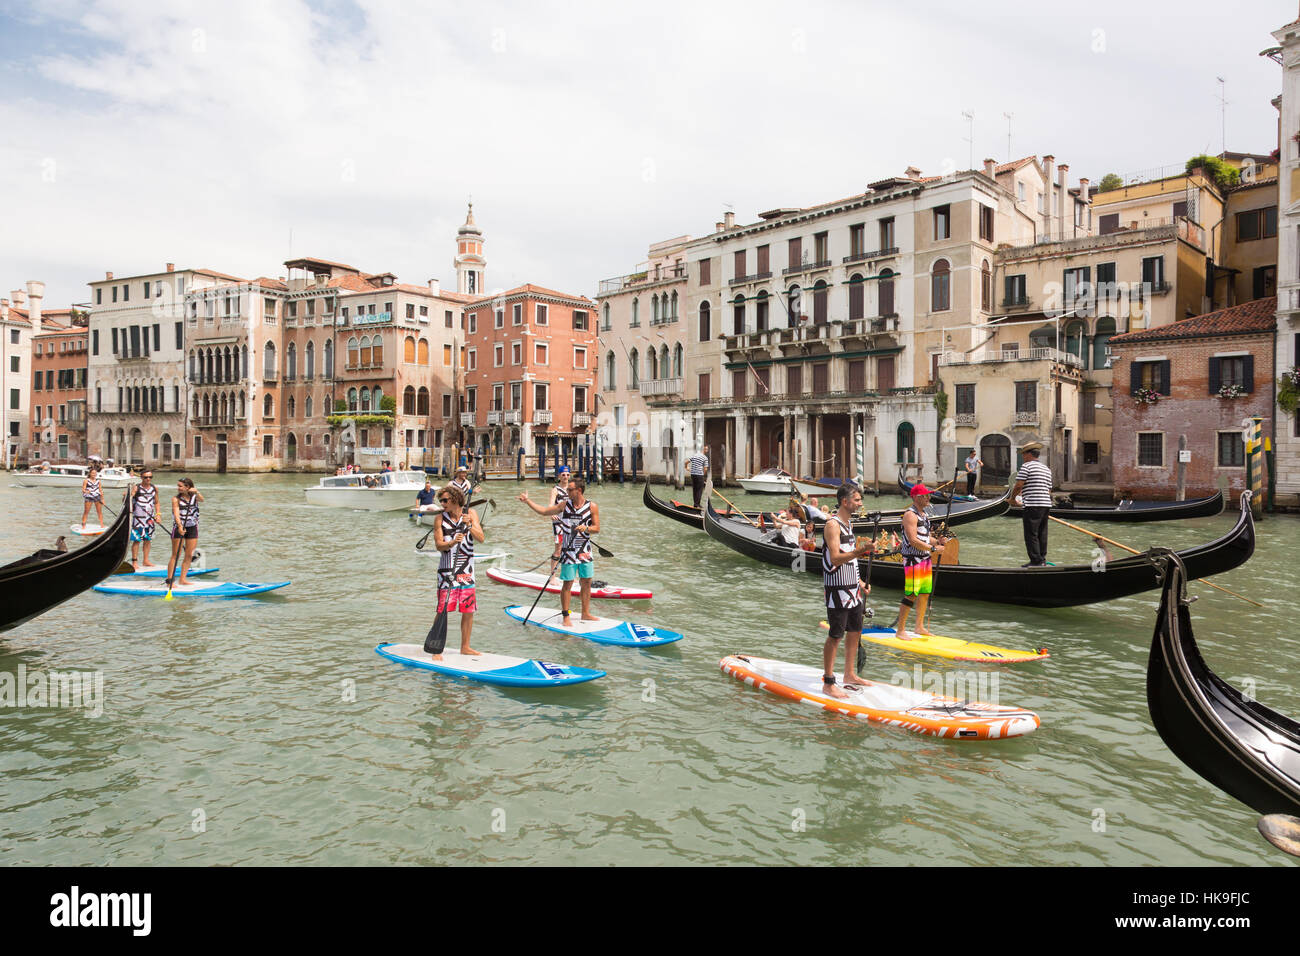 Group of active tourists stand up paddling on sup boards at Grand Canal, Venice, Italy. Stock Photo